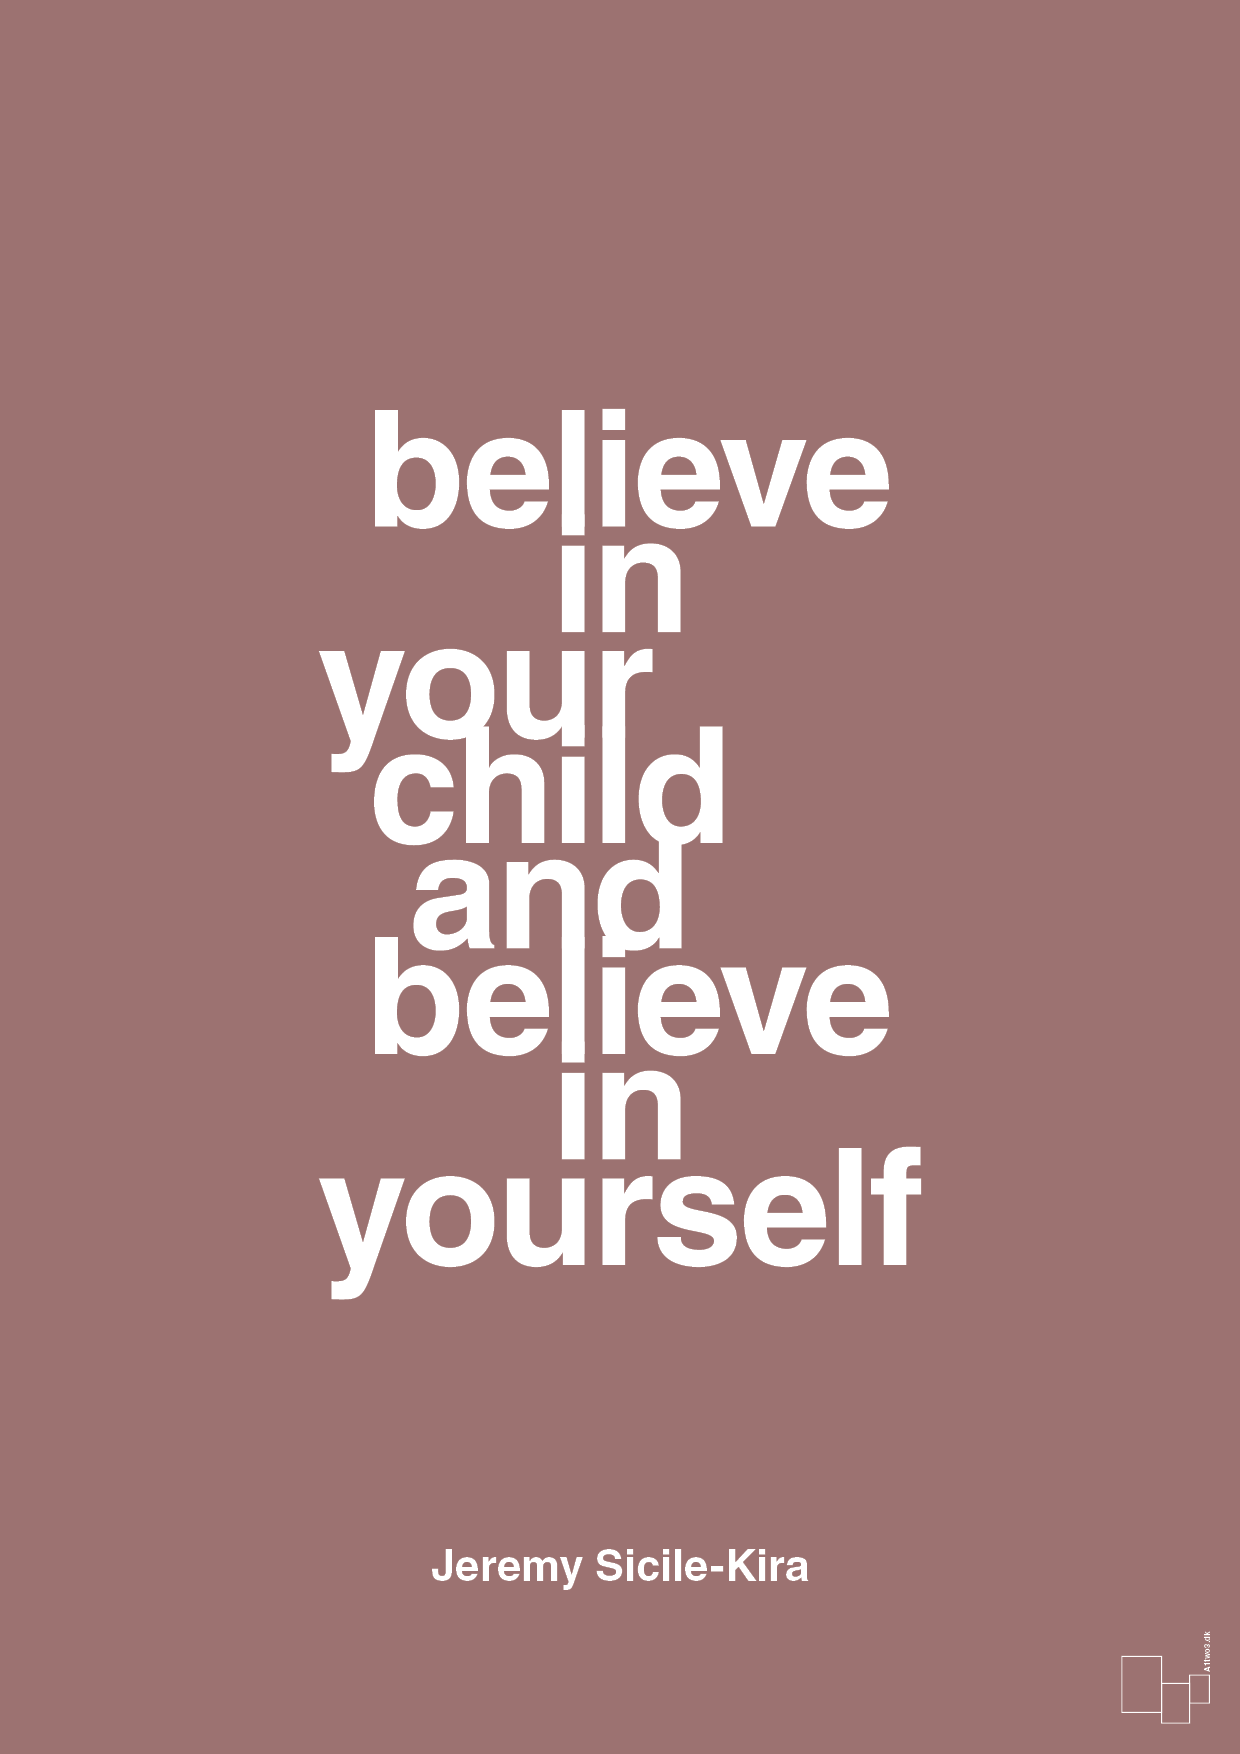 believe in your child and believe in yourself - Plakat med Samfund i Plum